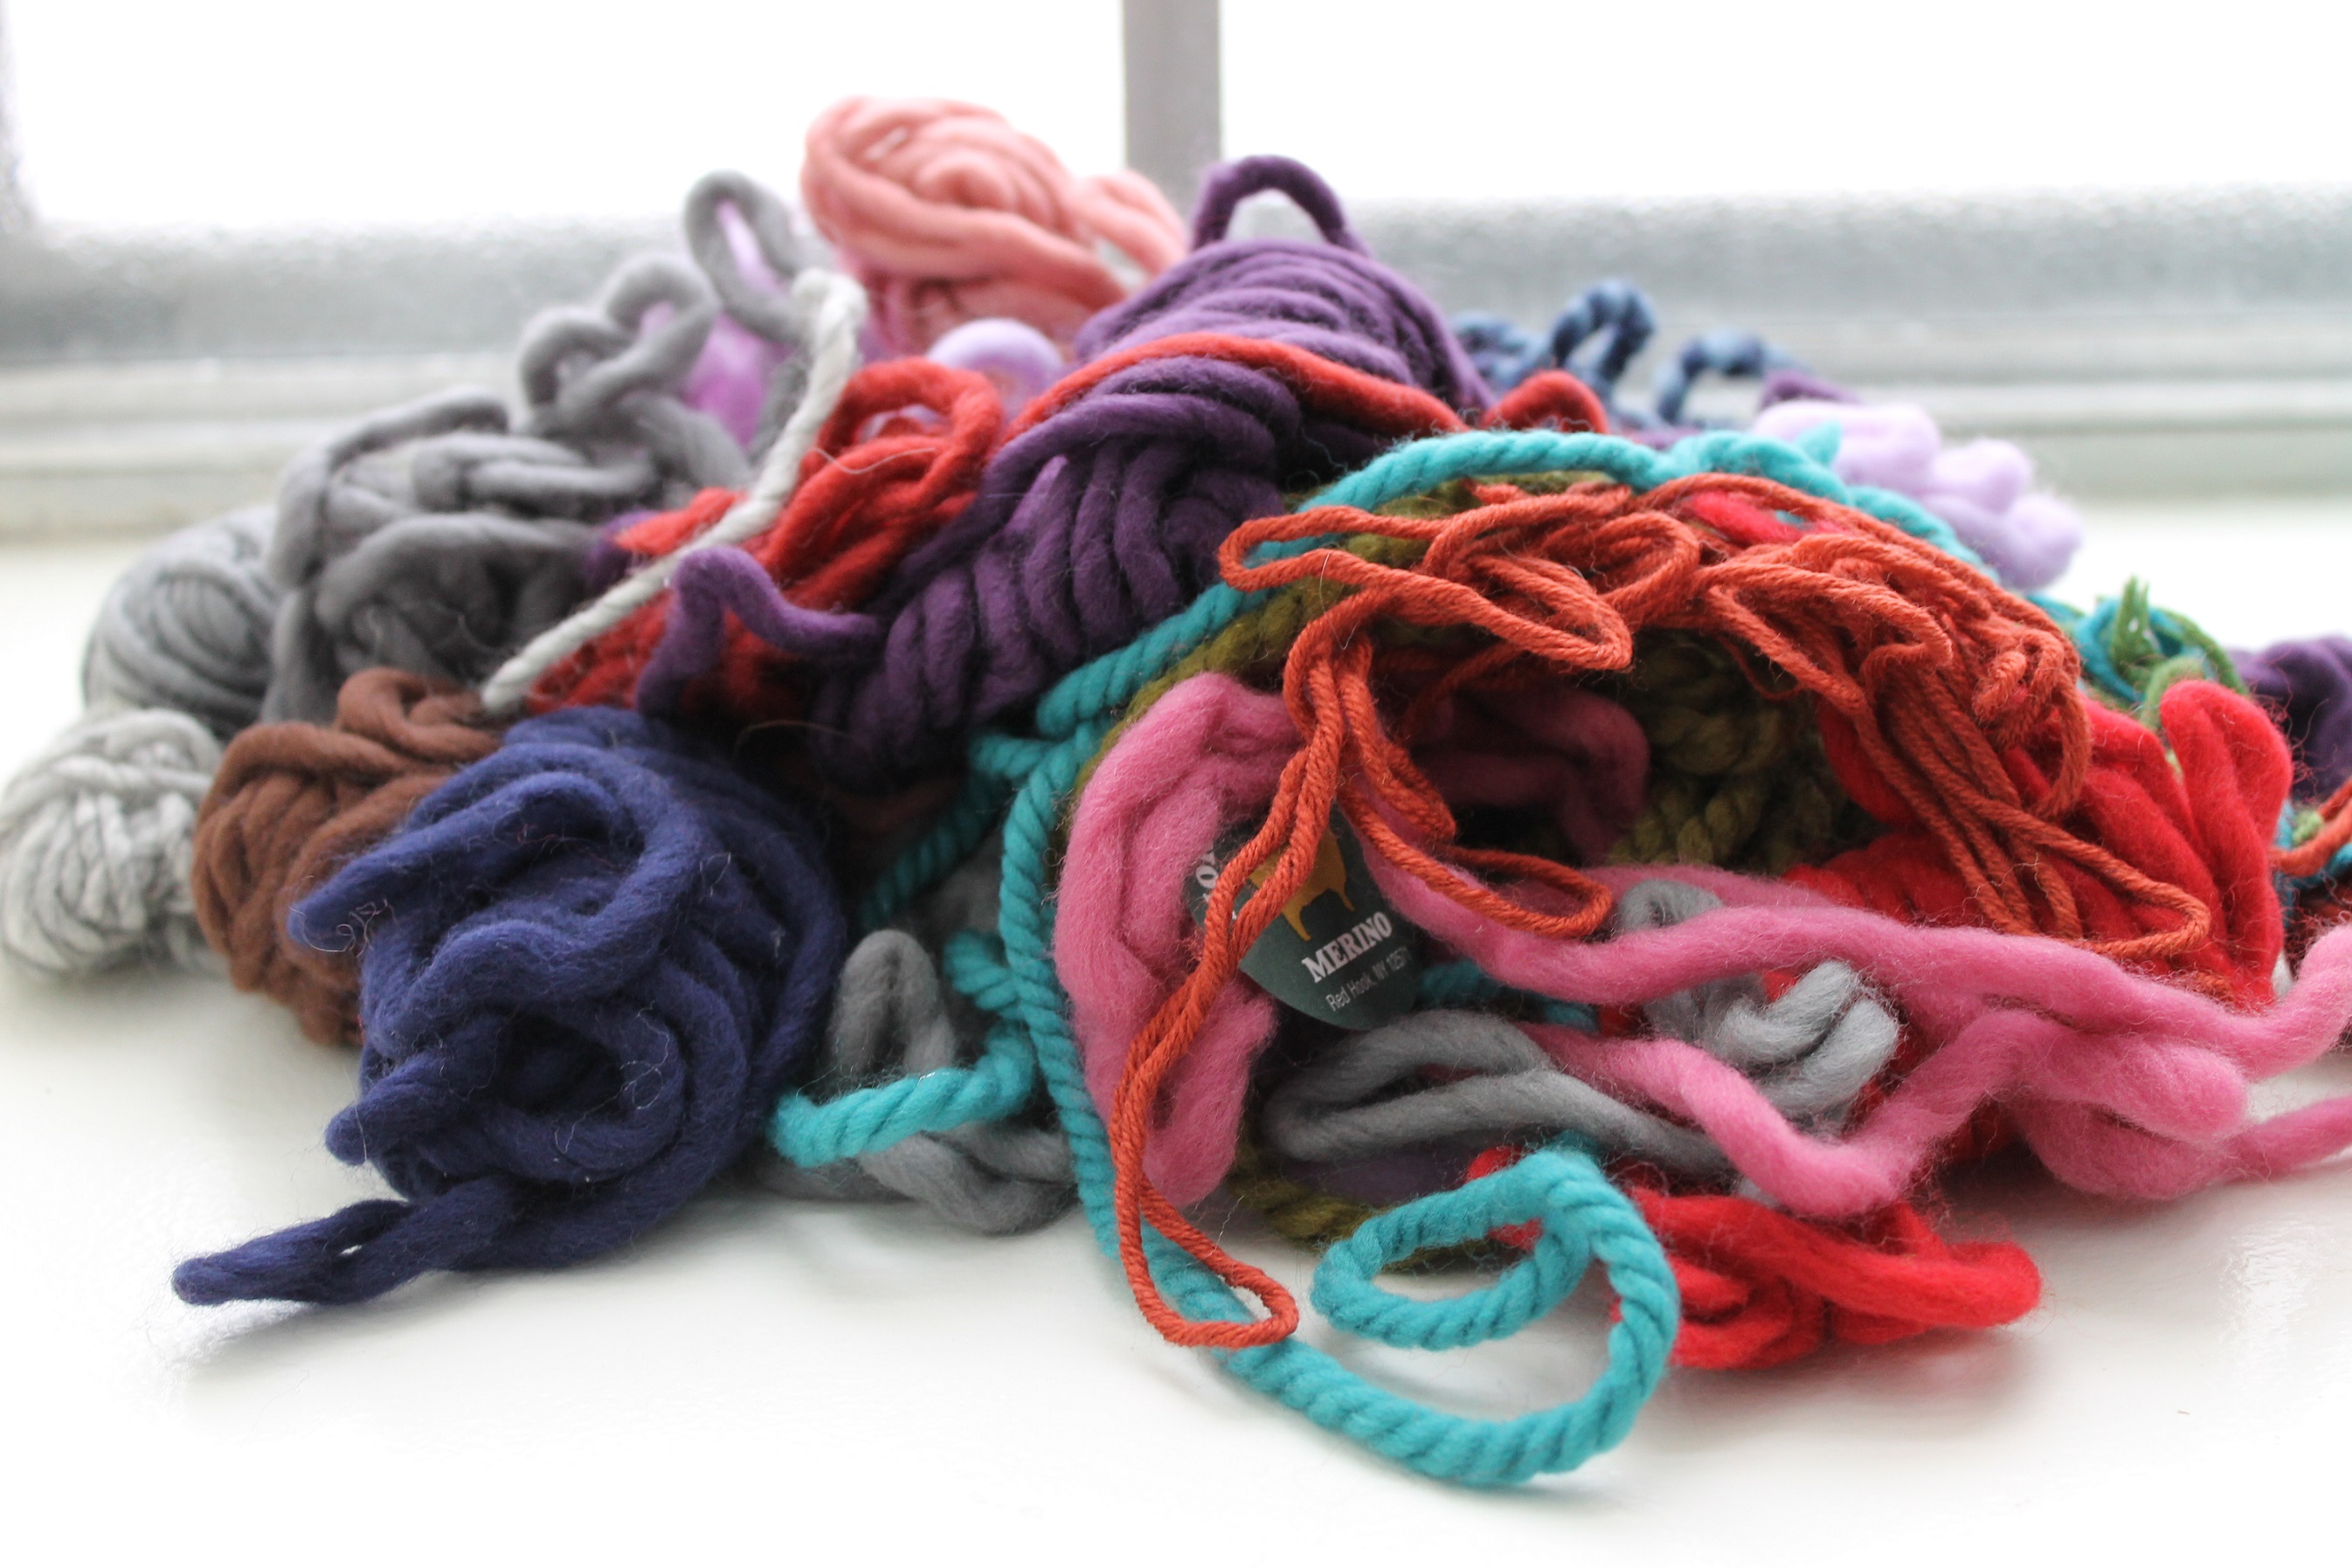 Donate Yarn to Spring Clean While Helping Others